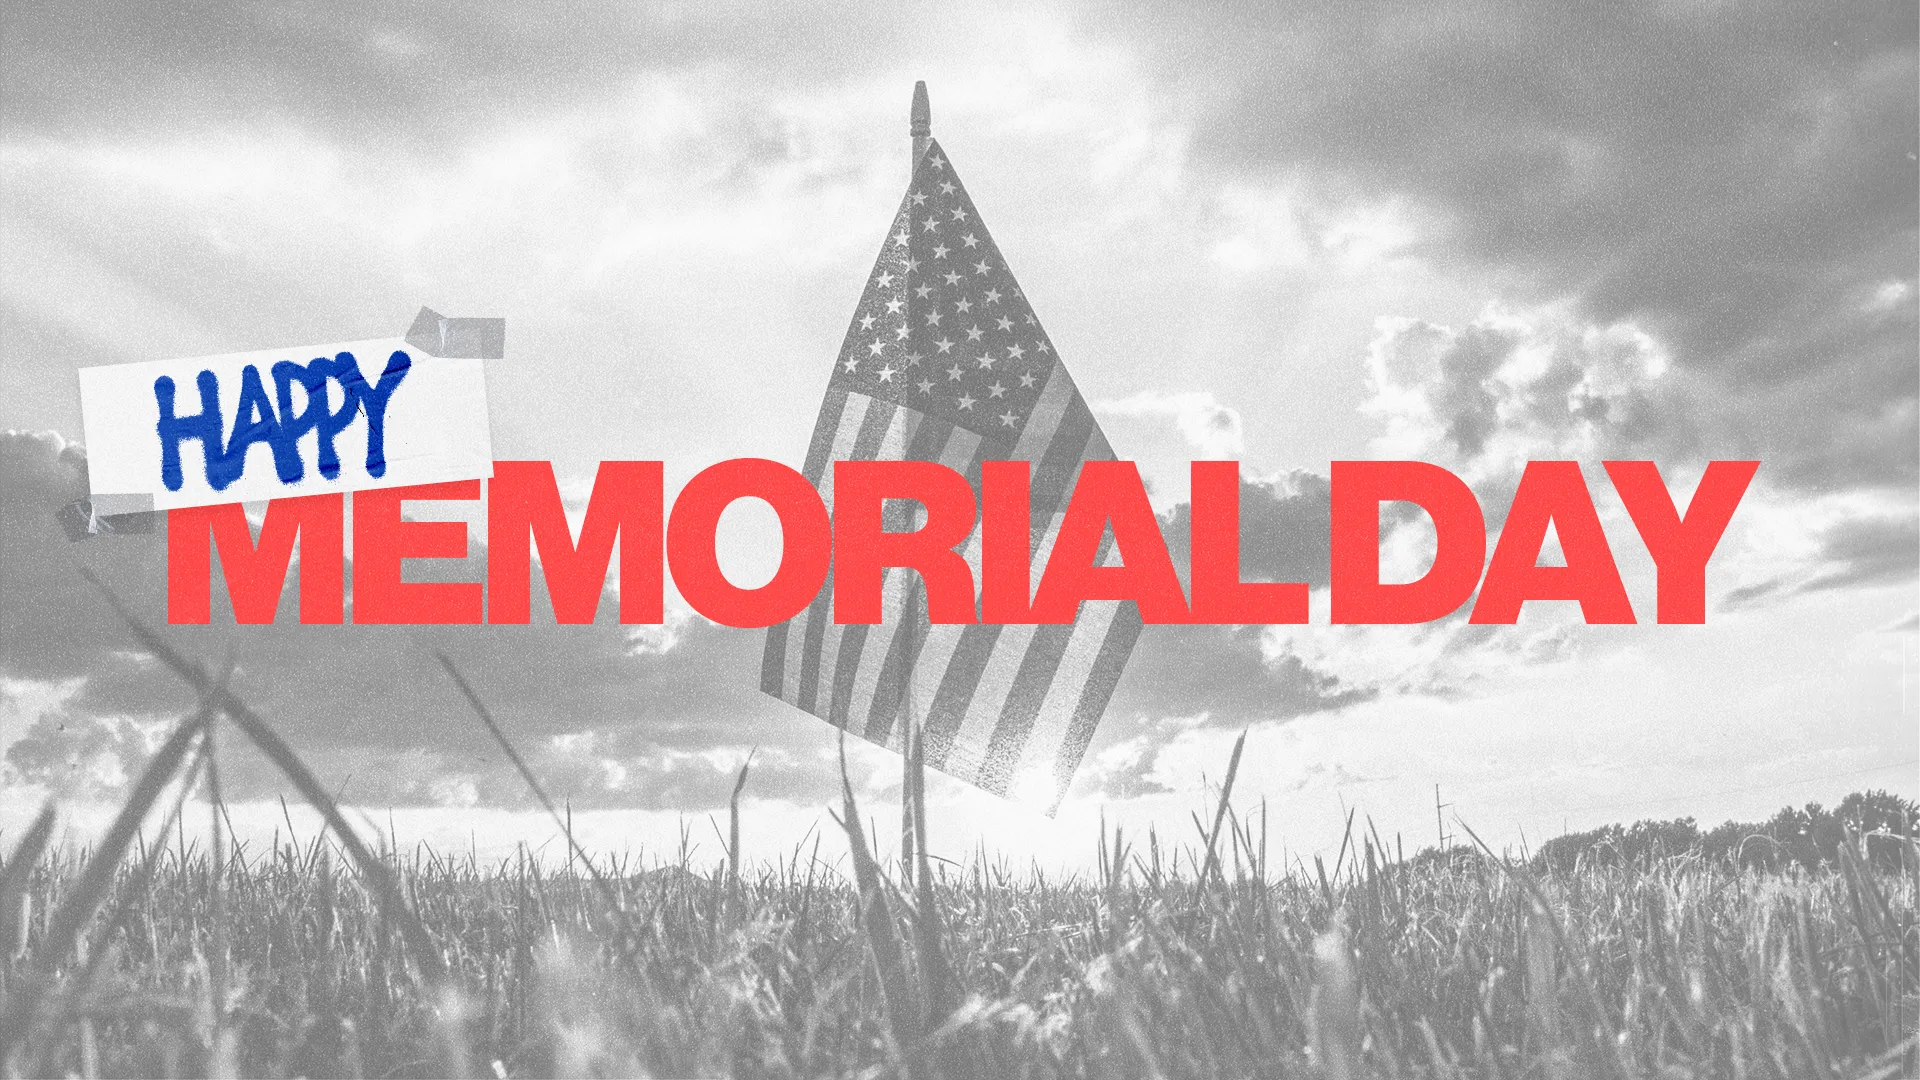 This Memorial Day Graphic, Featuring The American Flag Against A Stirring Sky, Is A Powerful Tribute To The Brave Souls Who Served Their Country, Making It A Respectful And Poignant Addition To Your Church'S Observance Of This Solemn Holiday.